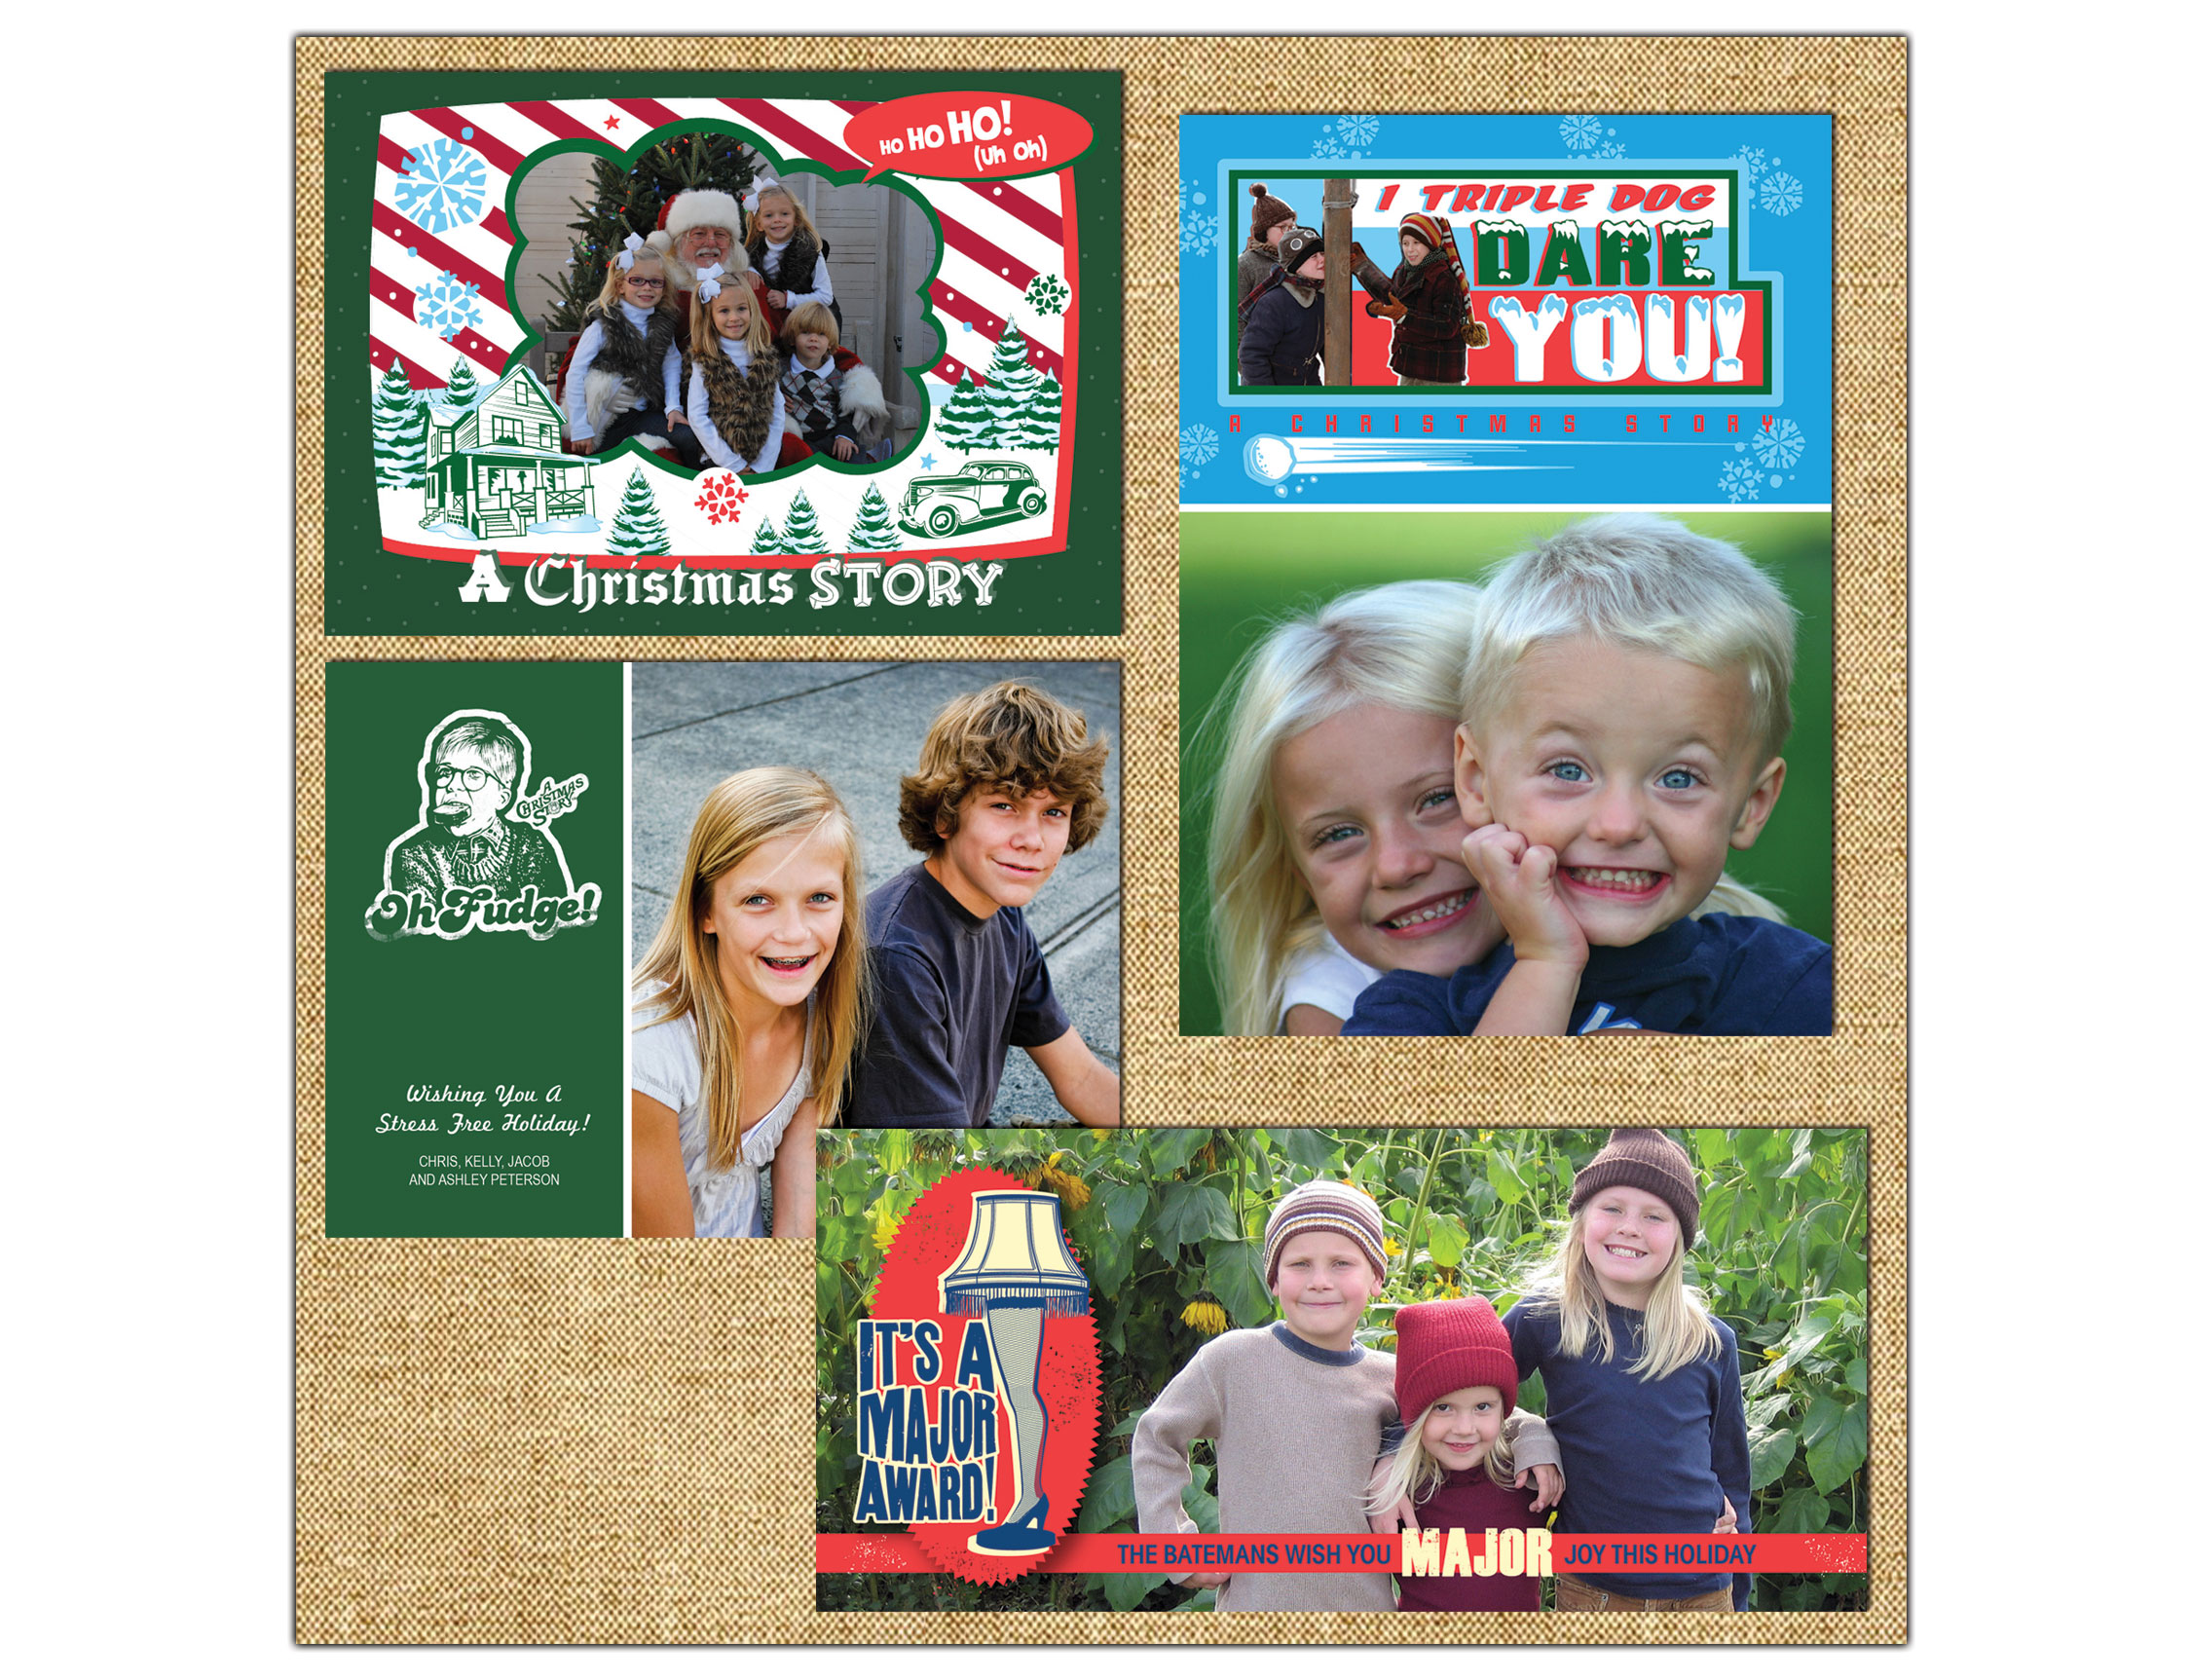 MOVIE PHOTOS CHRISTMAS STORY PLAYING CARD DECK 52601 52 CARDS NEW 